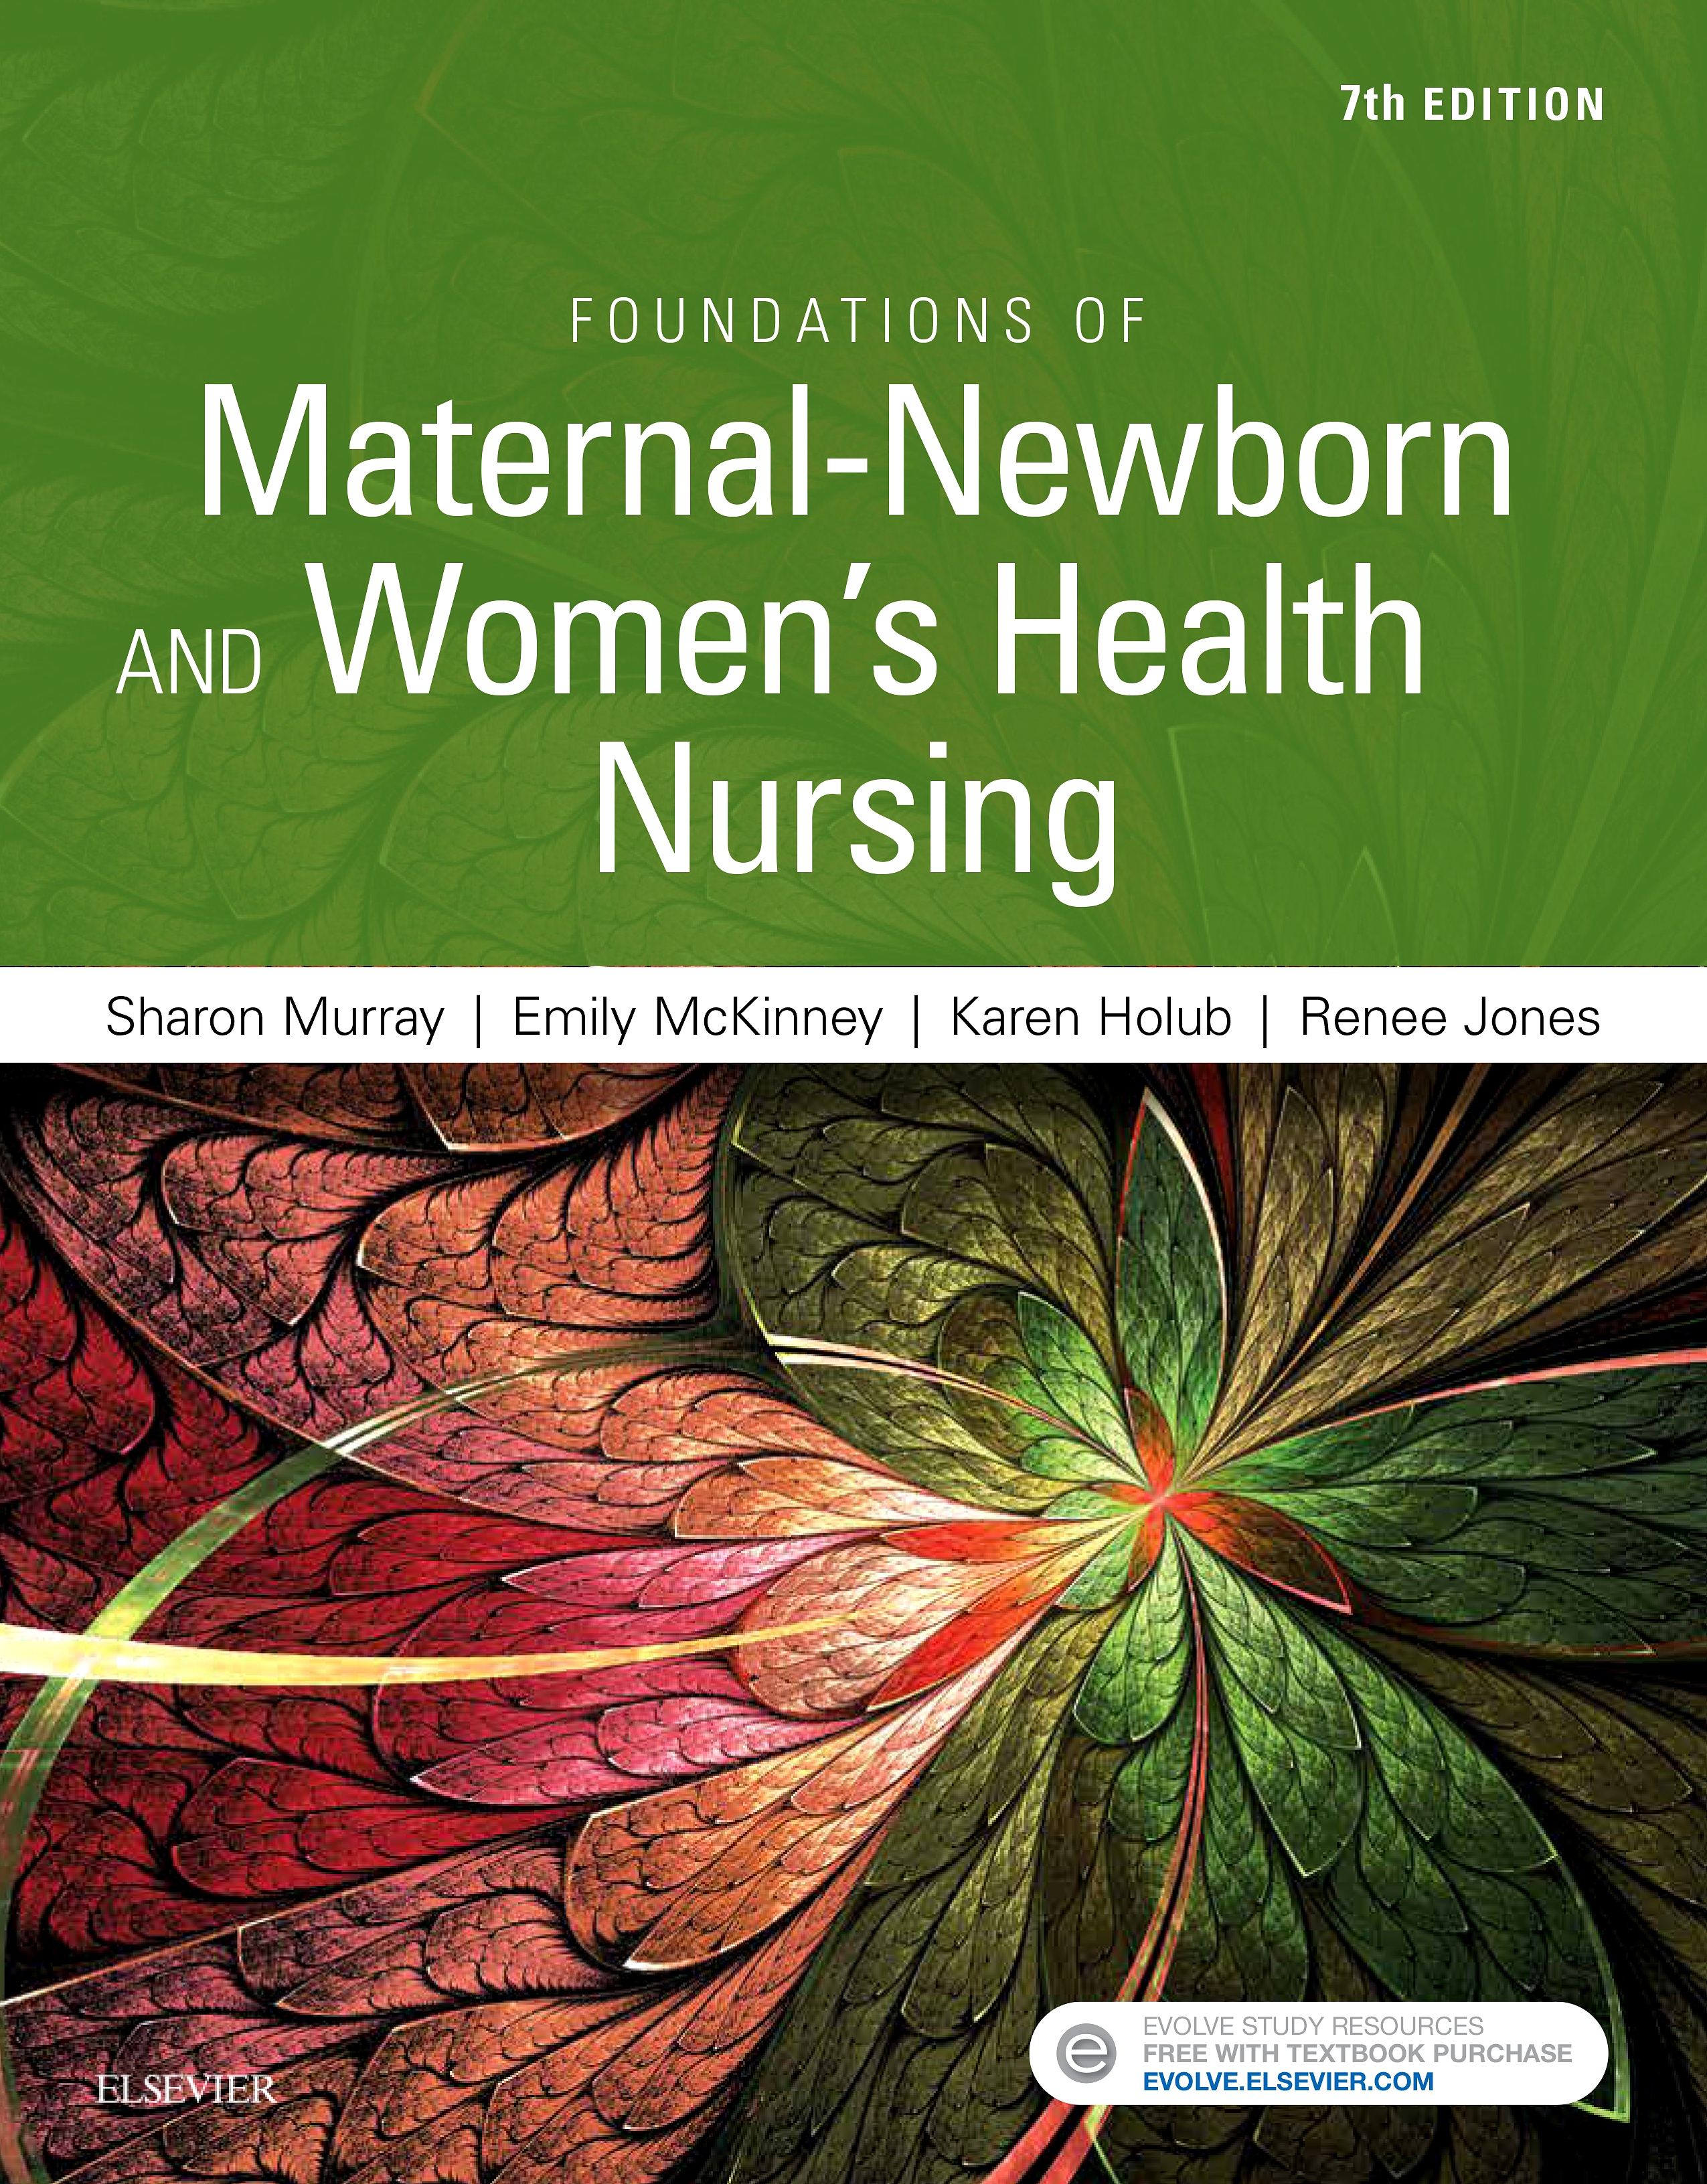 Evolve Resources for Foundations of Maternal-Newborn & Women's Health Nursing, 7th Edition